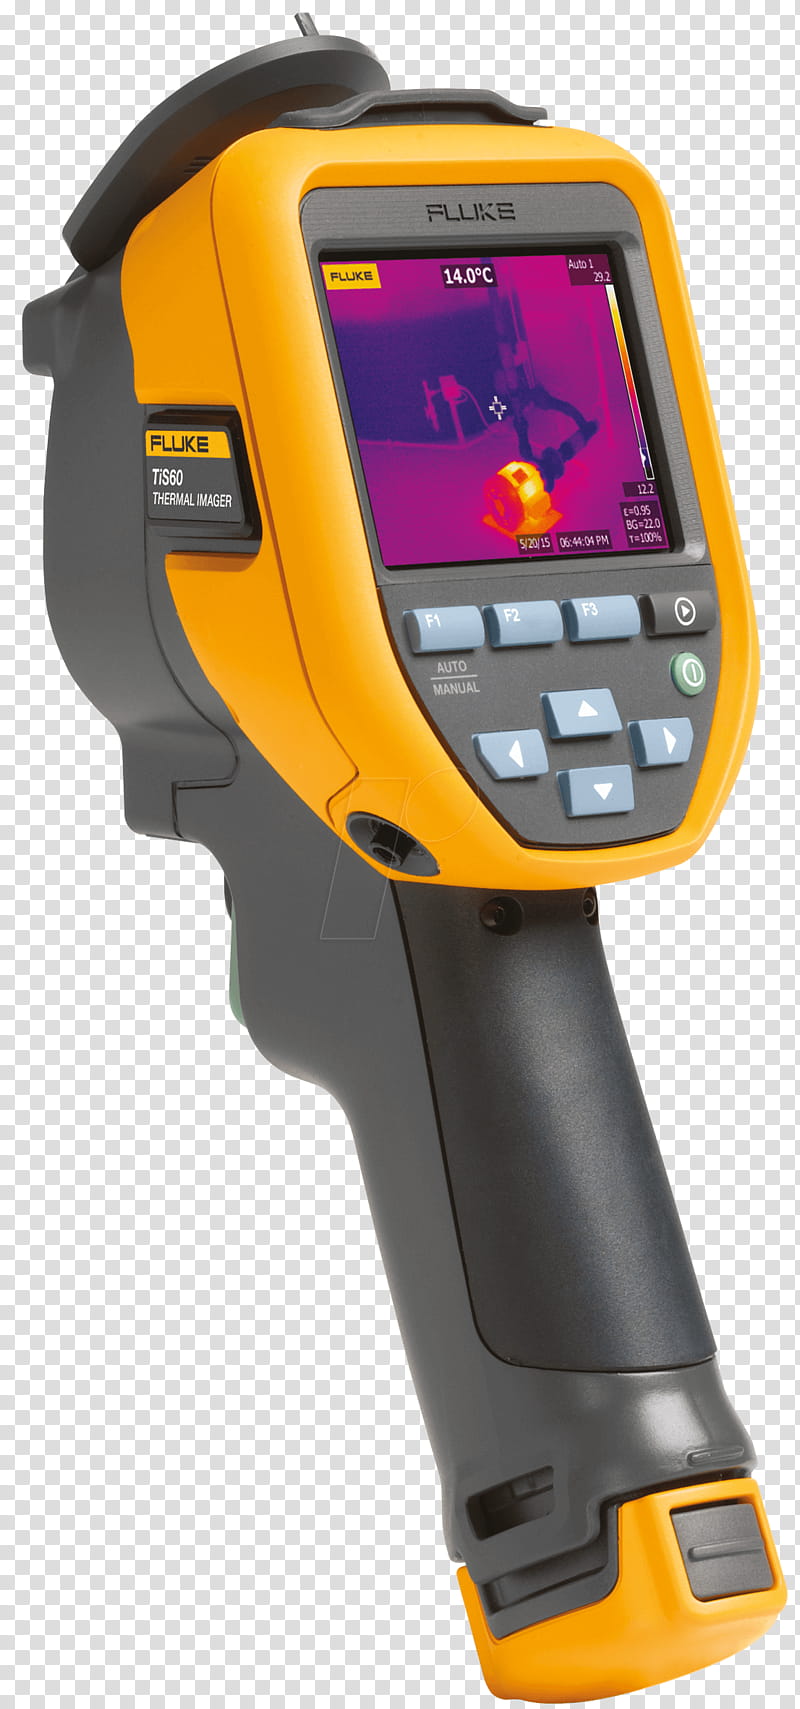 Camera, Fluke Thermal Infrared Camera Tis, Thermal Imaging Cameras, Fluke Thermal Camera Tis, Fluke Corporation, Fluke Tis Thermal, Thermographic Camera, Measuring Instrument transparent background PNG clipart